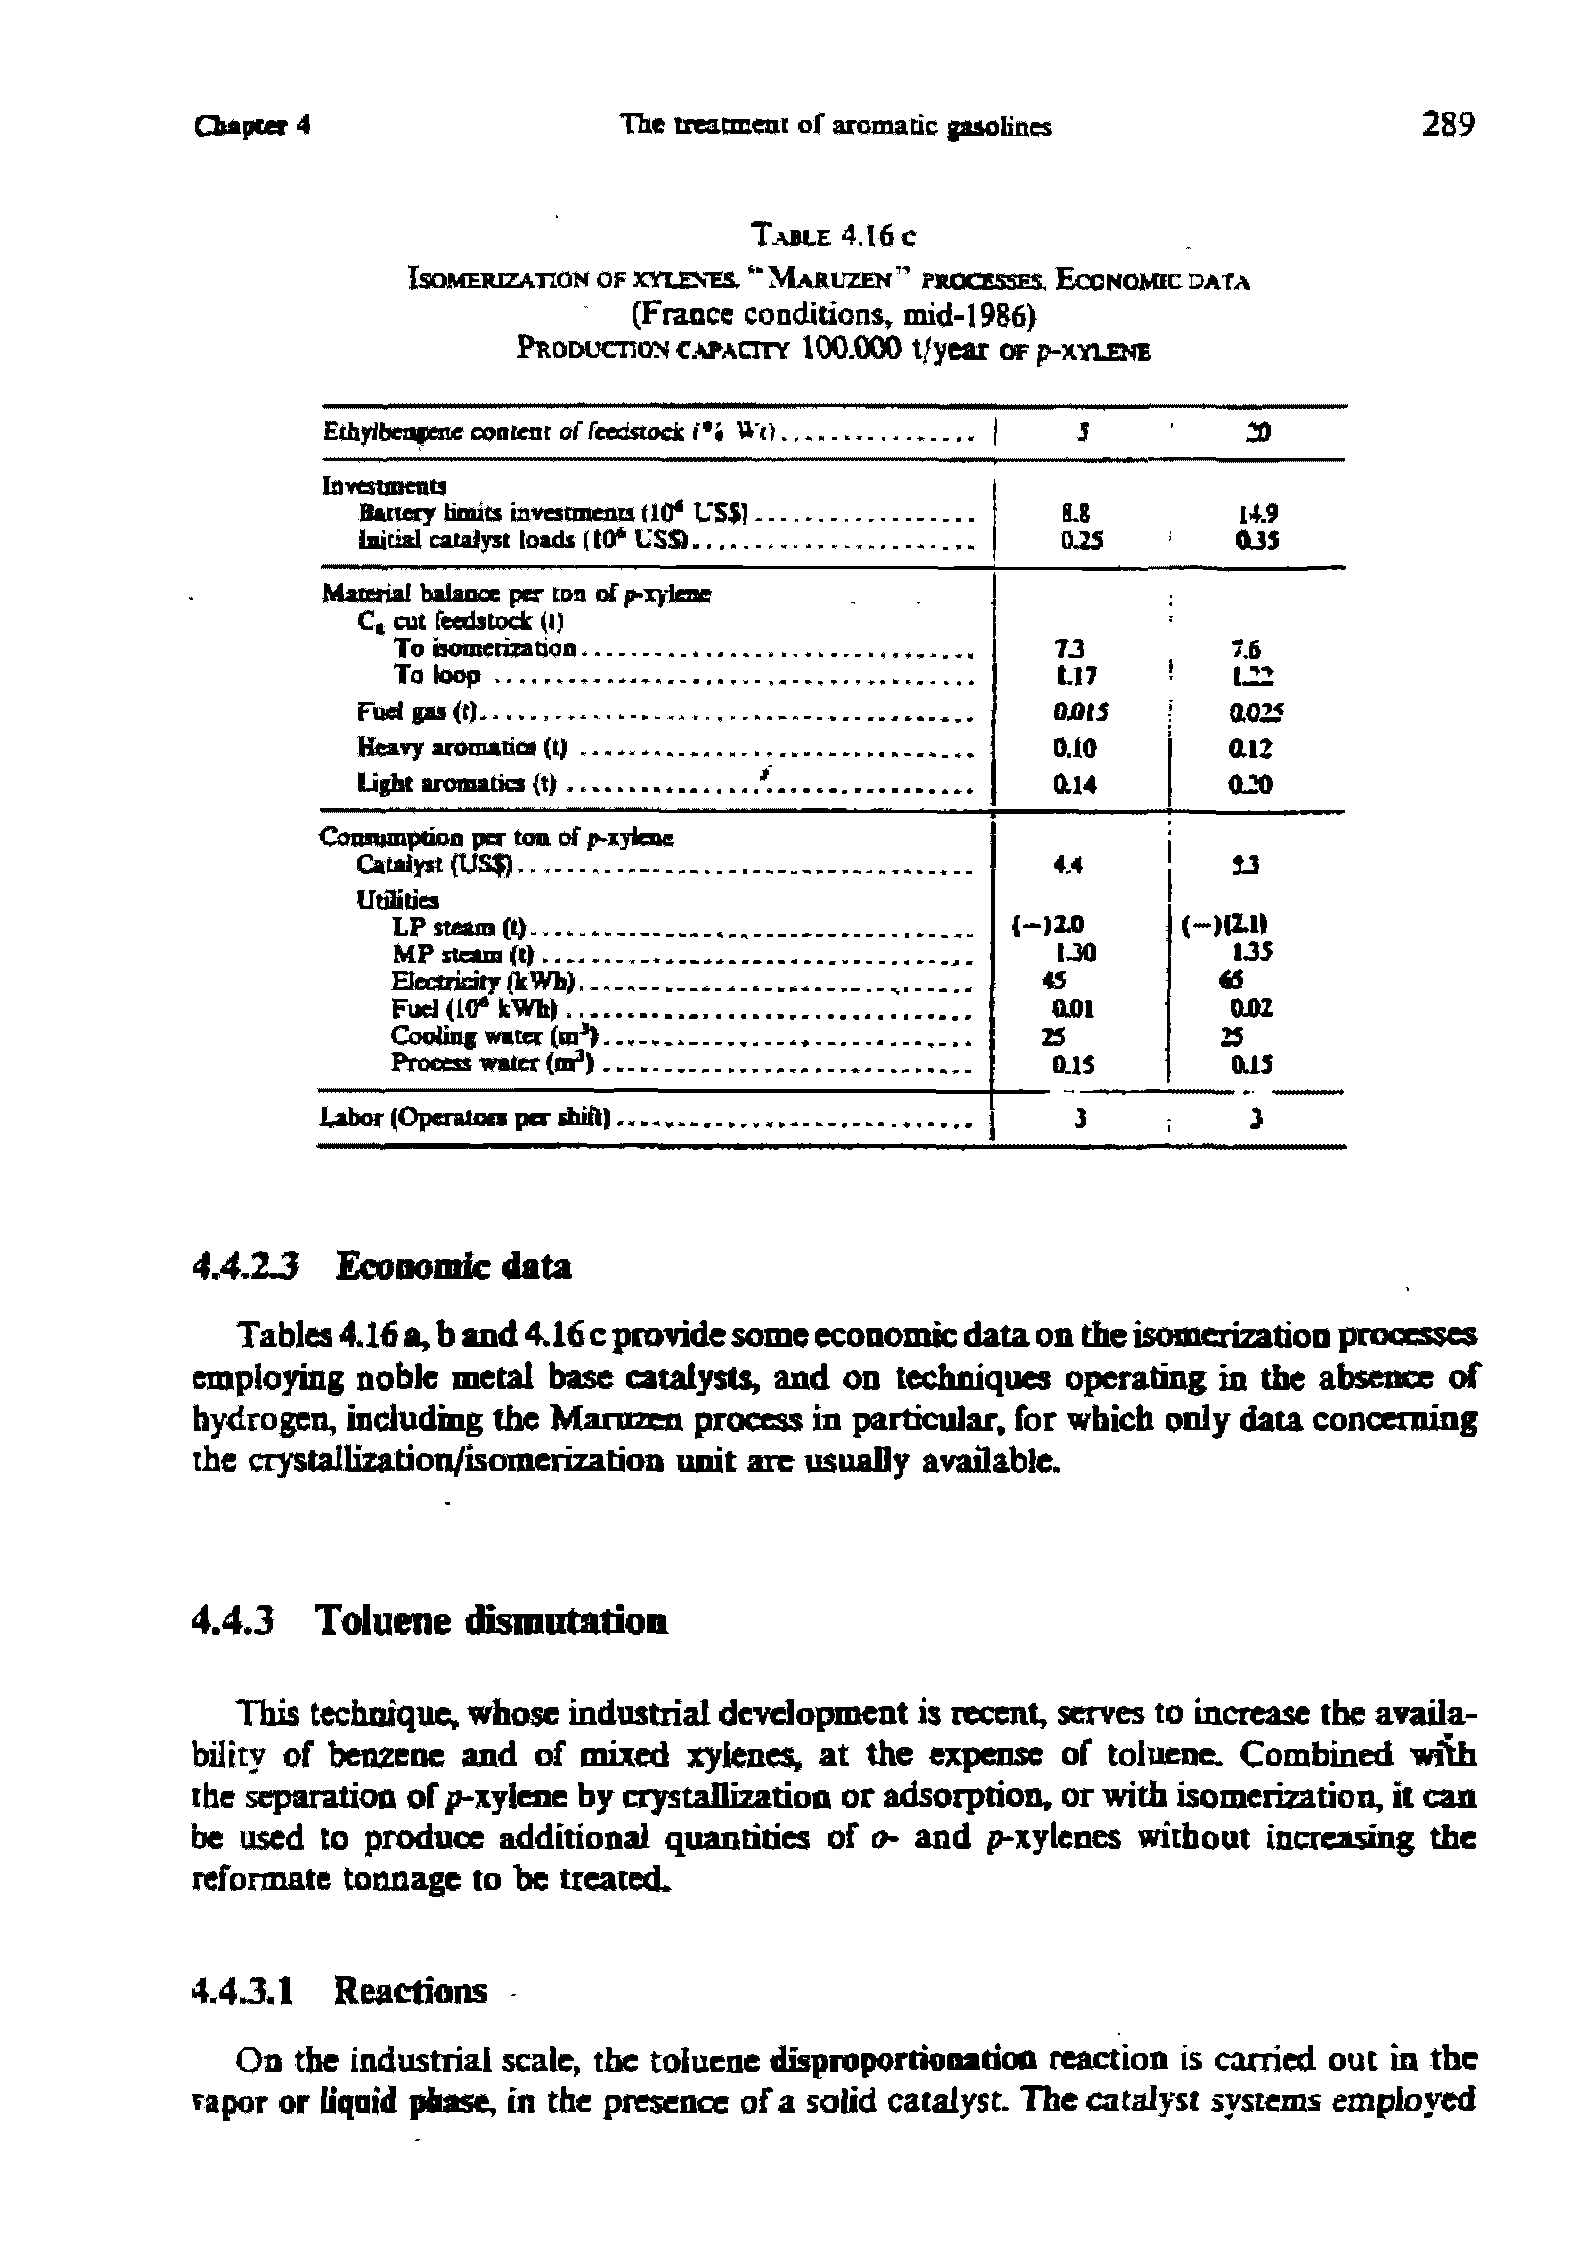 Tables 4.16 a, b and 4.16 c provide some economic data on the isomerization processes employing noble metal base catalysts, and on techniques operating in the absence of hydrogen, including the Maruzen process in particular, for which only data concerning the crystallization/isomerization unit are usually available.